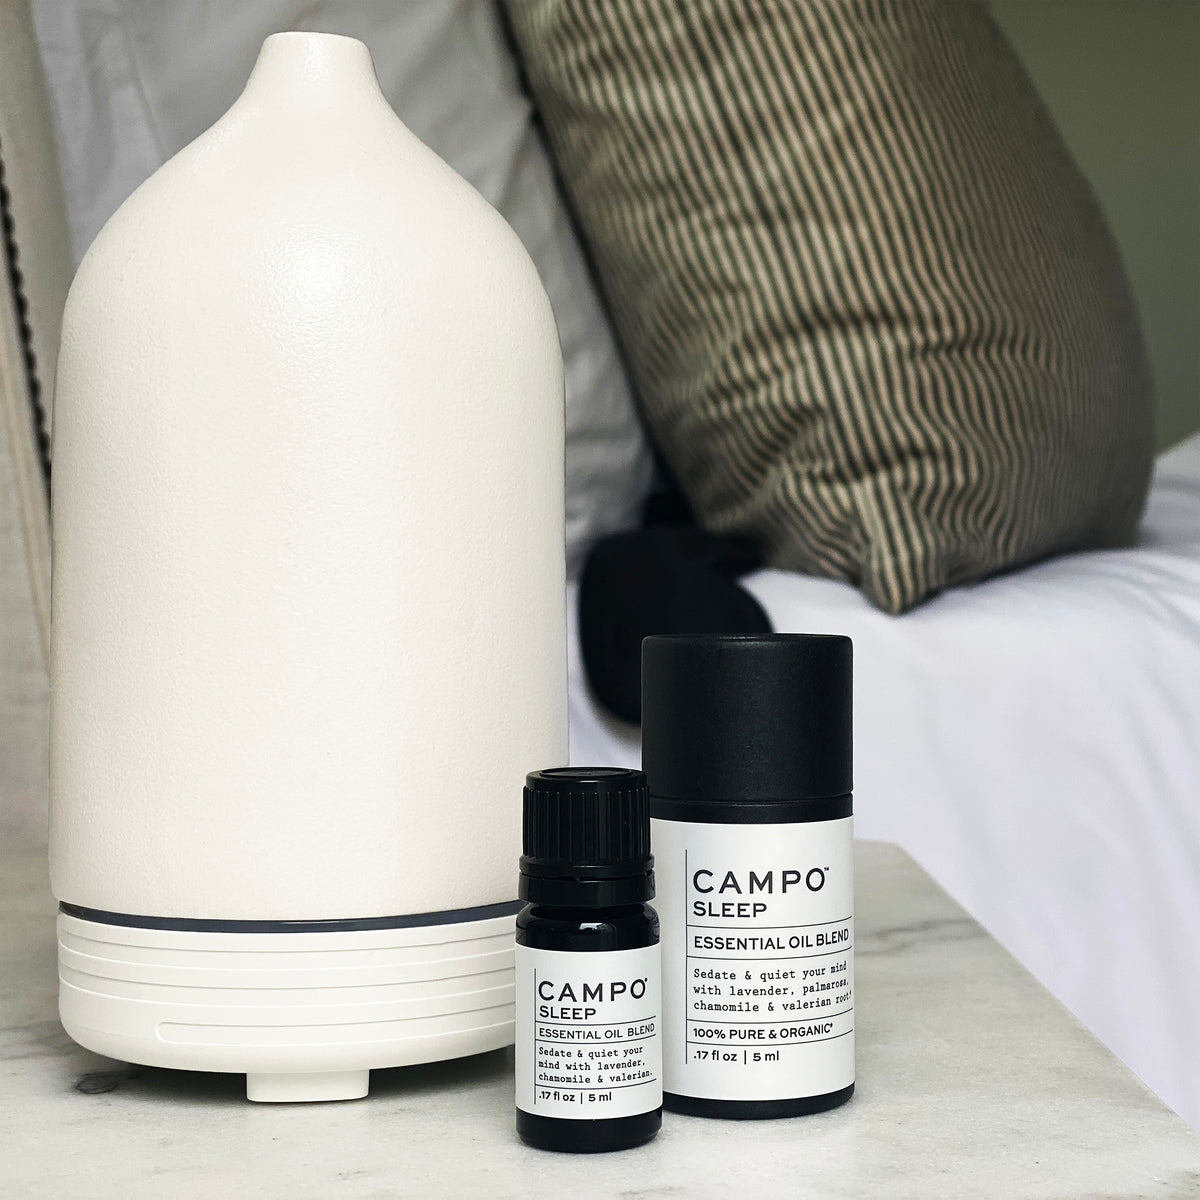 Campo Beauty SLEEP Blend 5 ml and 15 ml Essential Oil. Calm &amp; quiet your mind naturally with this 100% pure essential oil blend of French Lavender, Wild Palmarosa, Roman Chamomile, and Valerian Root.